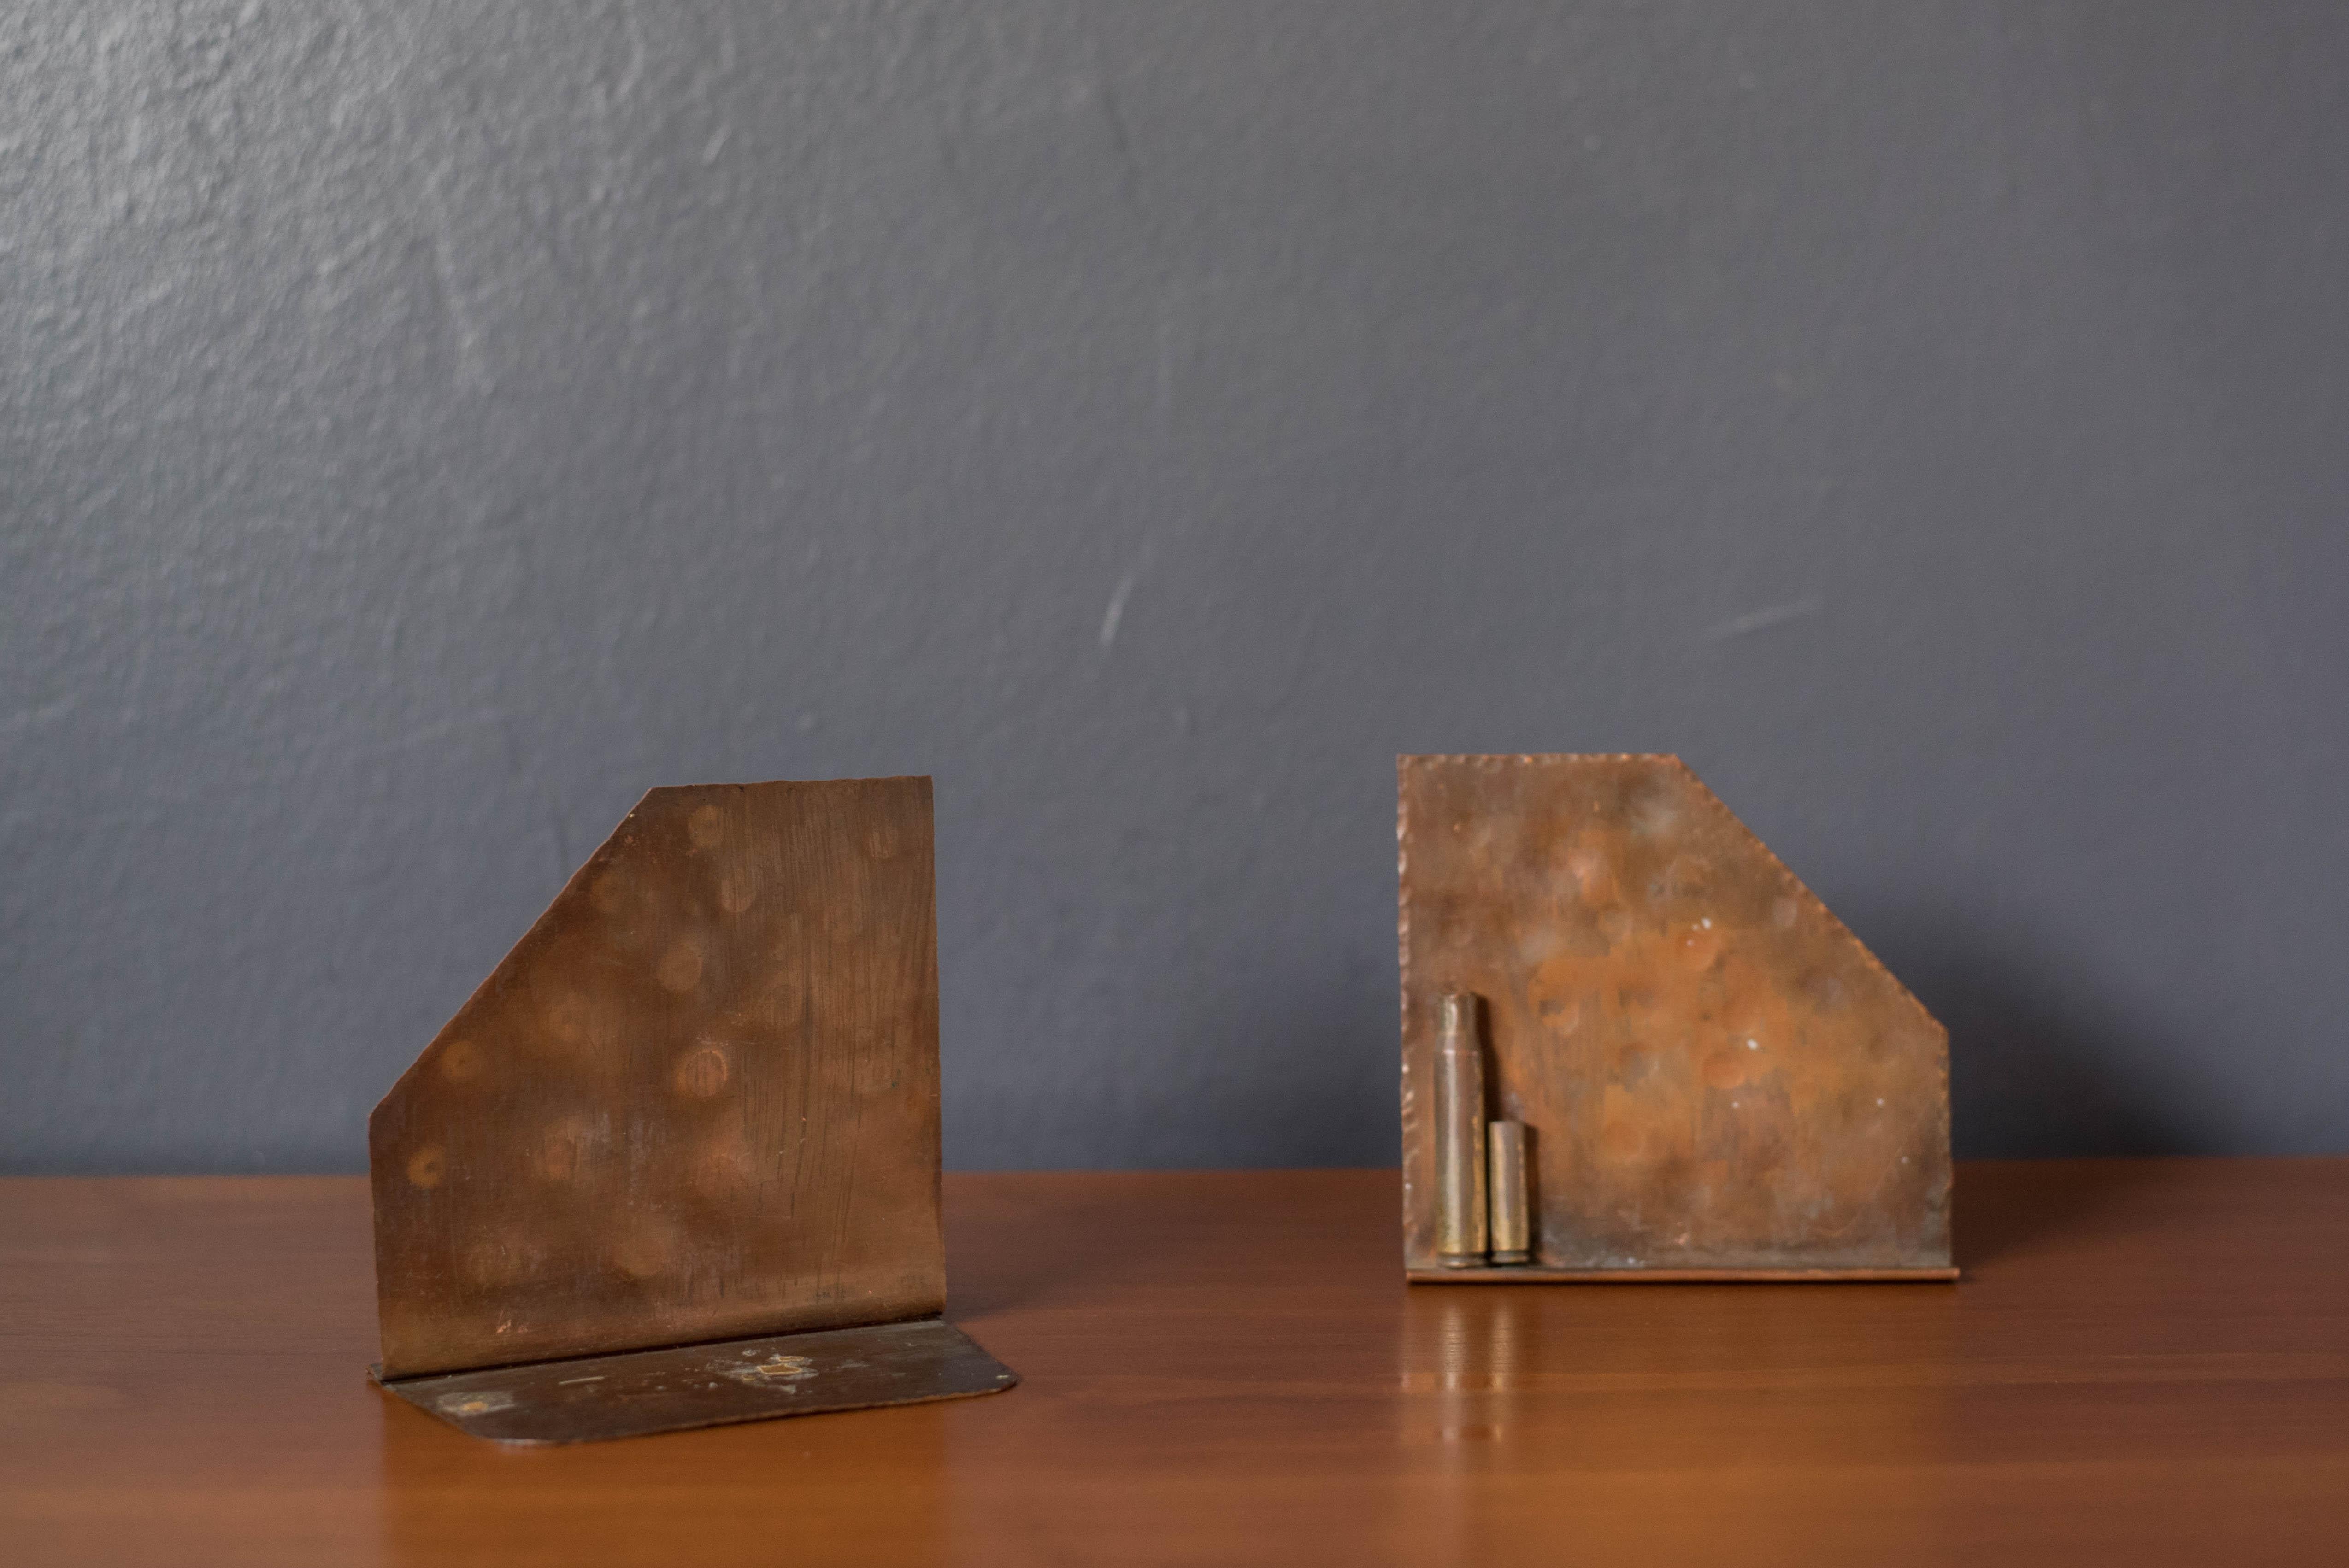 Pair of Vintage Brass and Copper Trench Art Bookends For Sale 2